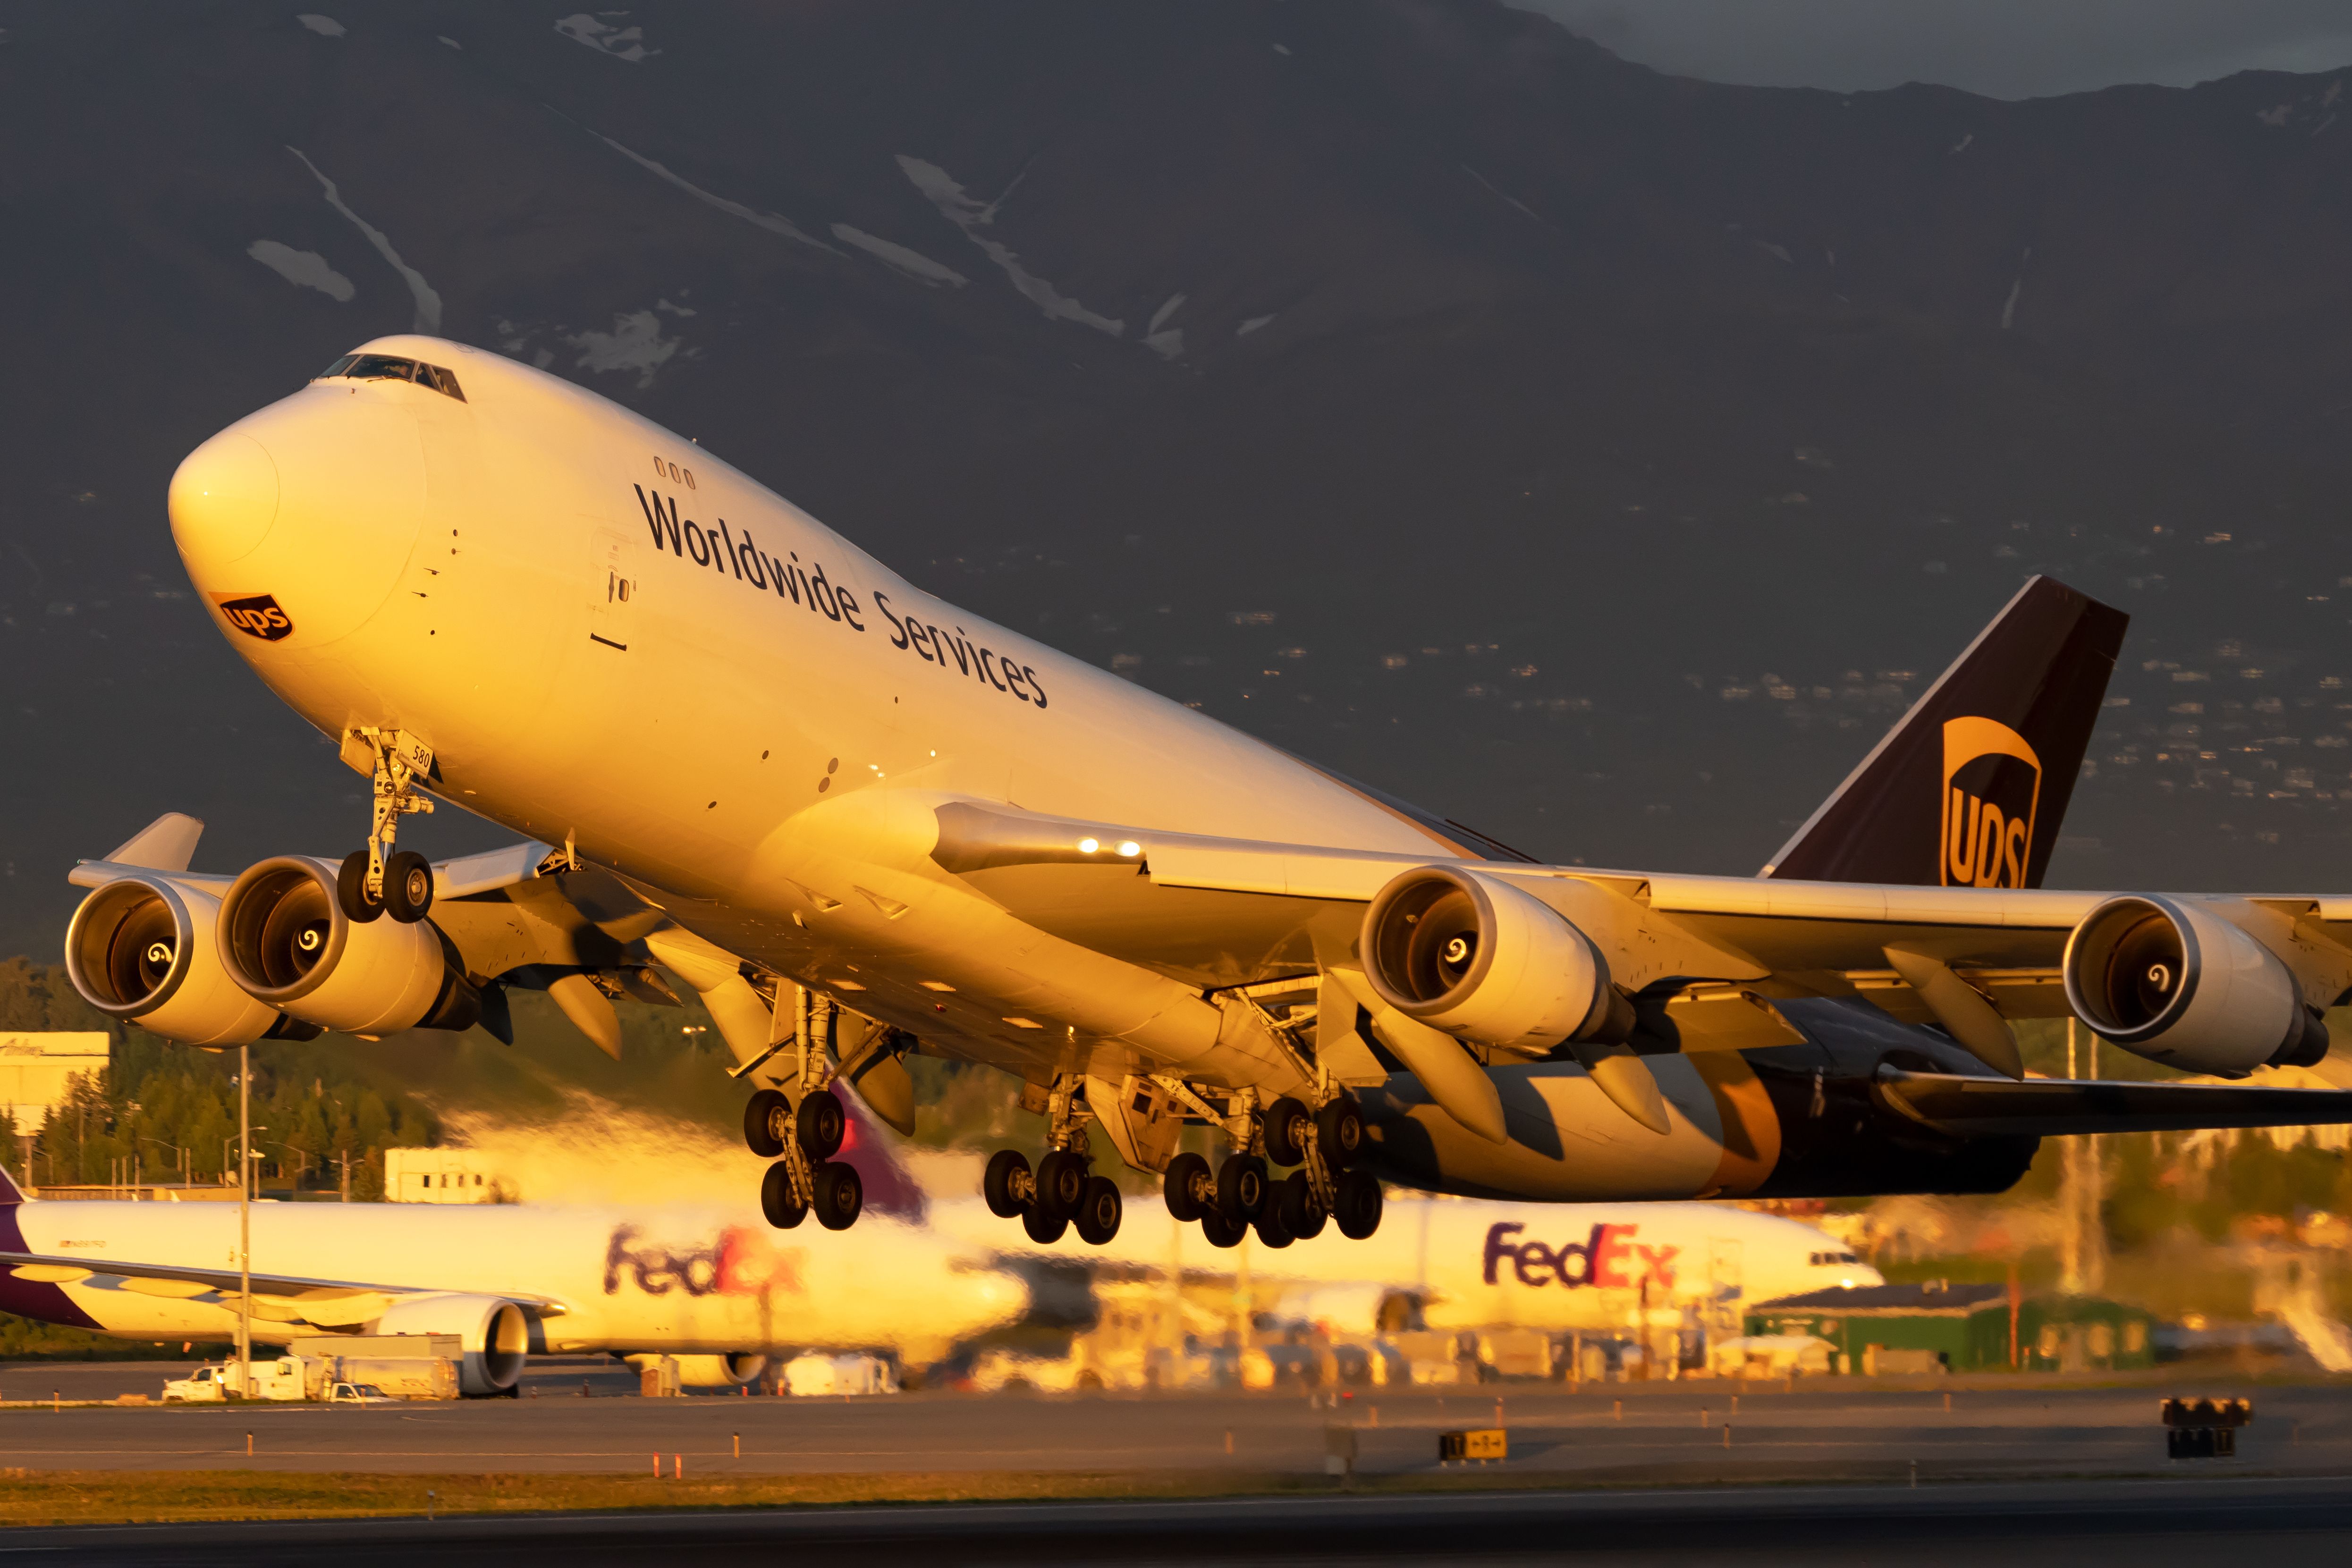 UPS Boeing 747-400F - at Anchorage International Airport with FedEx jets in background